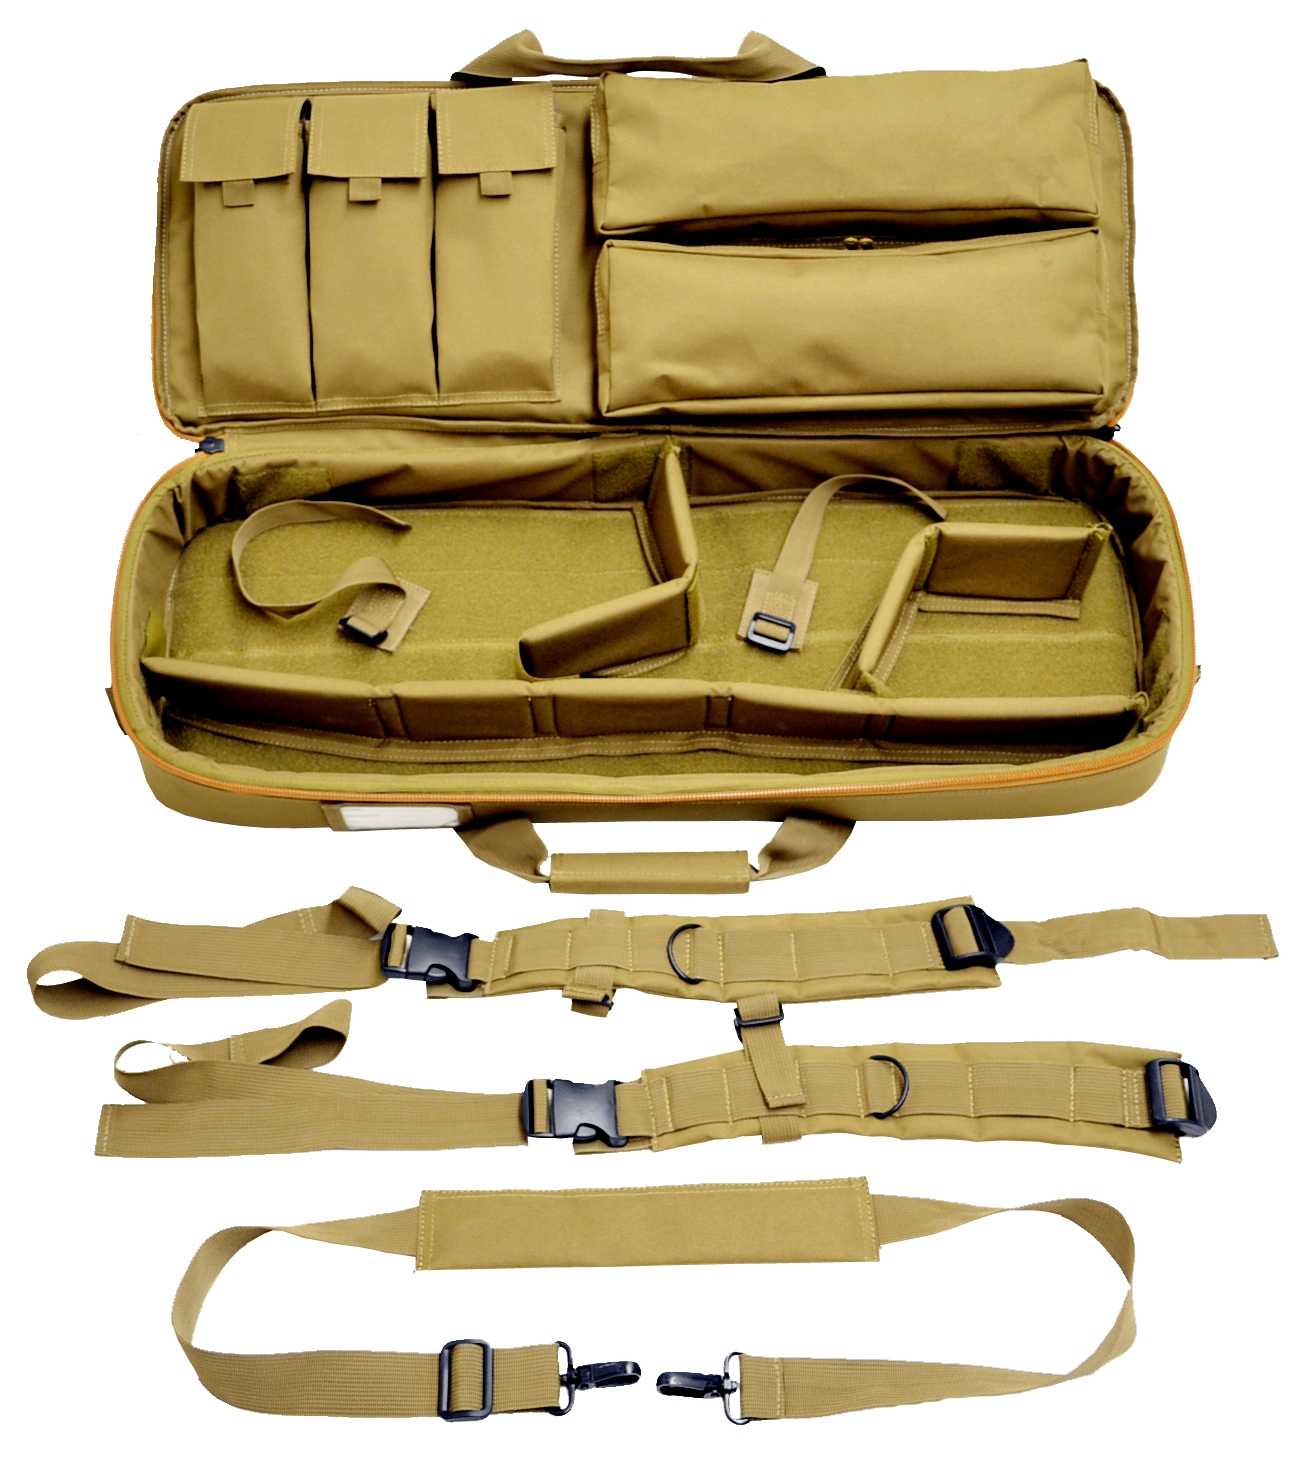 Gun Case with backpack, Rifle case, dividers